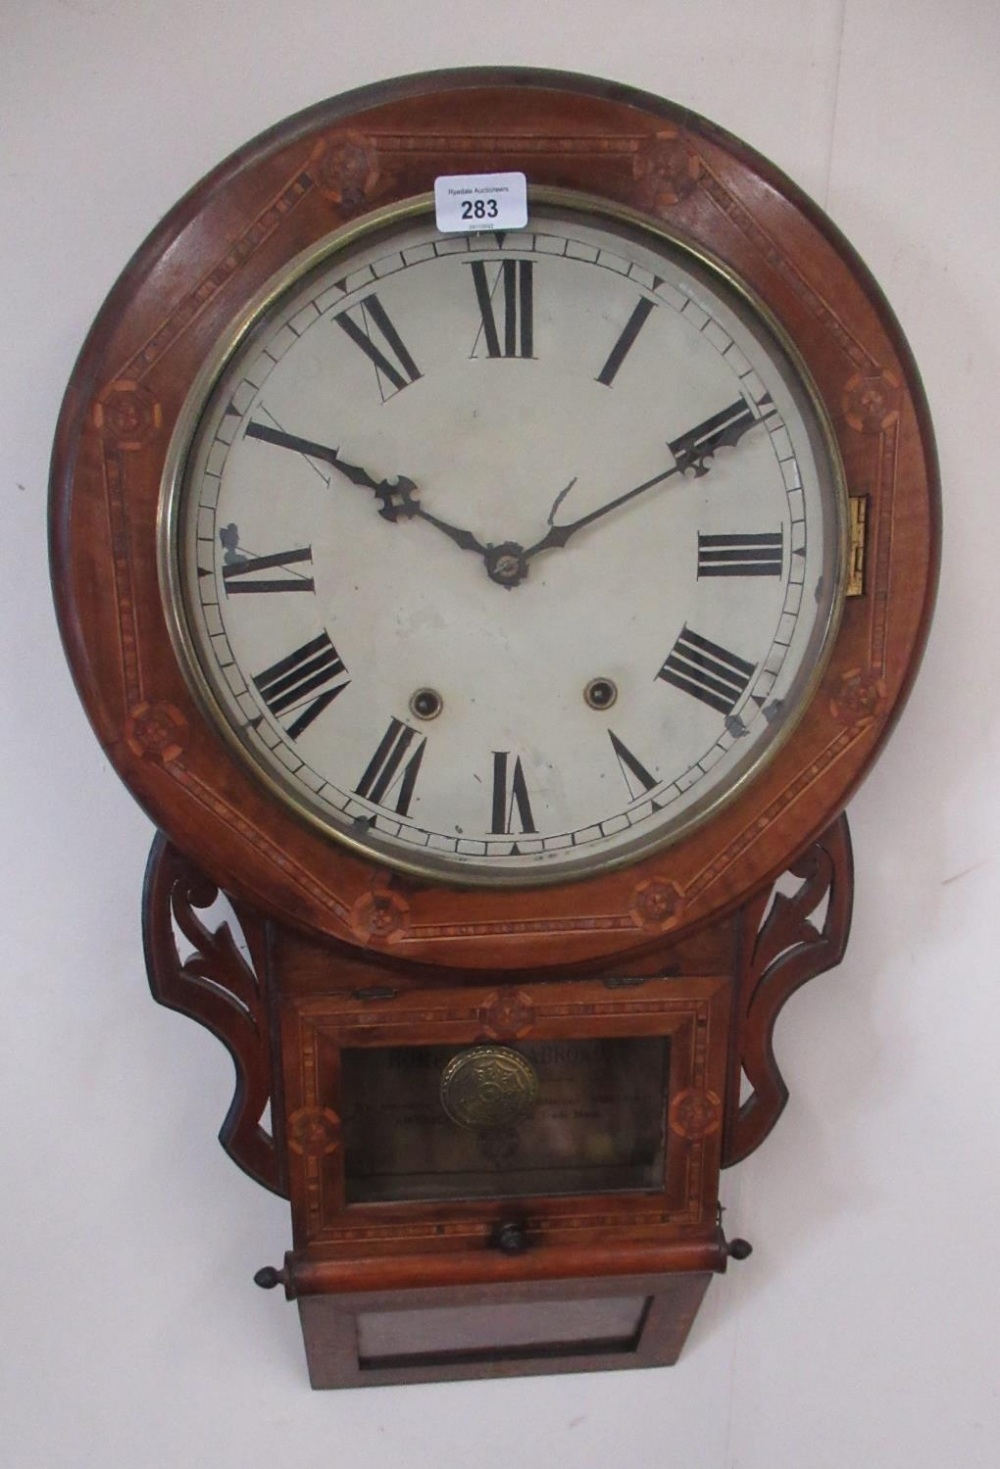 Jerome & Co. superior 8 day Anglo-American clocks, late C19th/early C20th inlaid walnut drop dial